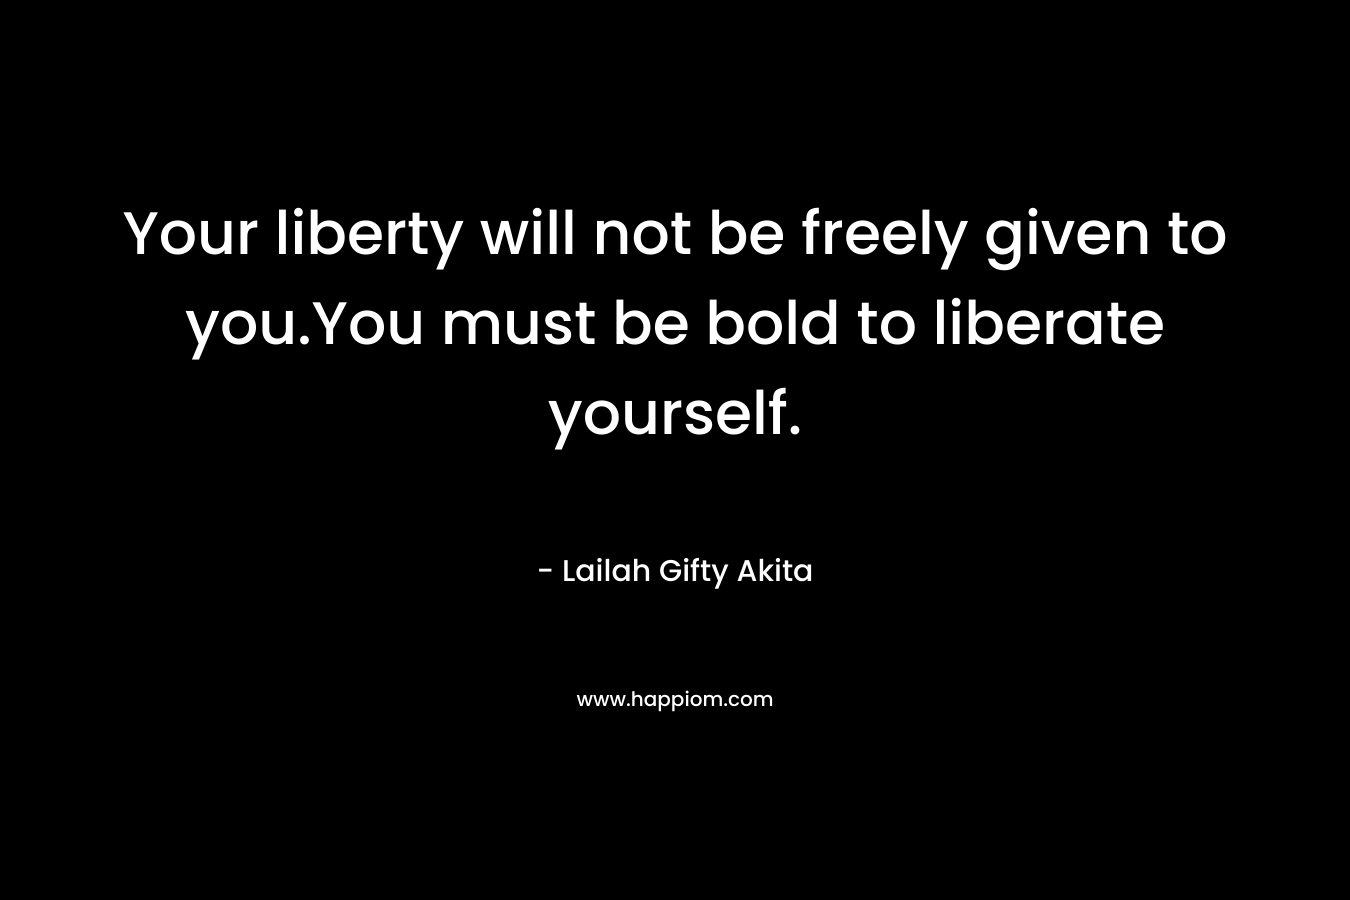 Your liberty will not be freely given to you.You must be bold to liberate yourself. – Lailah Gifty Akita